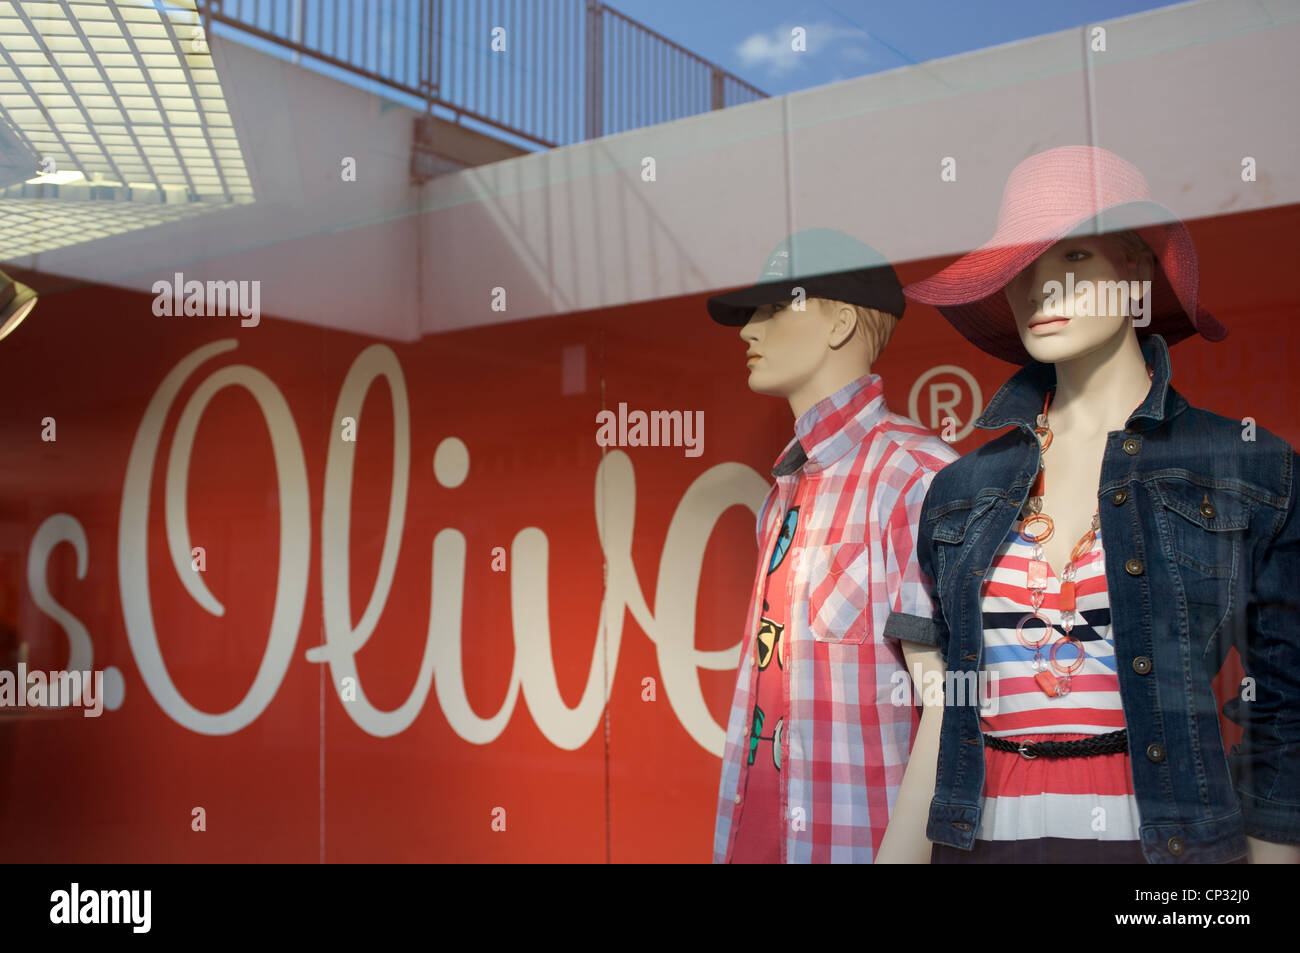 S.Oliver clothes shop Germany Stock Photo